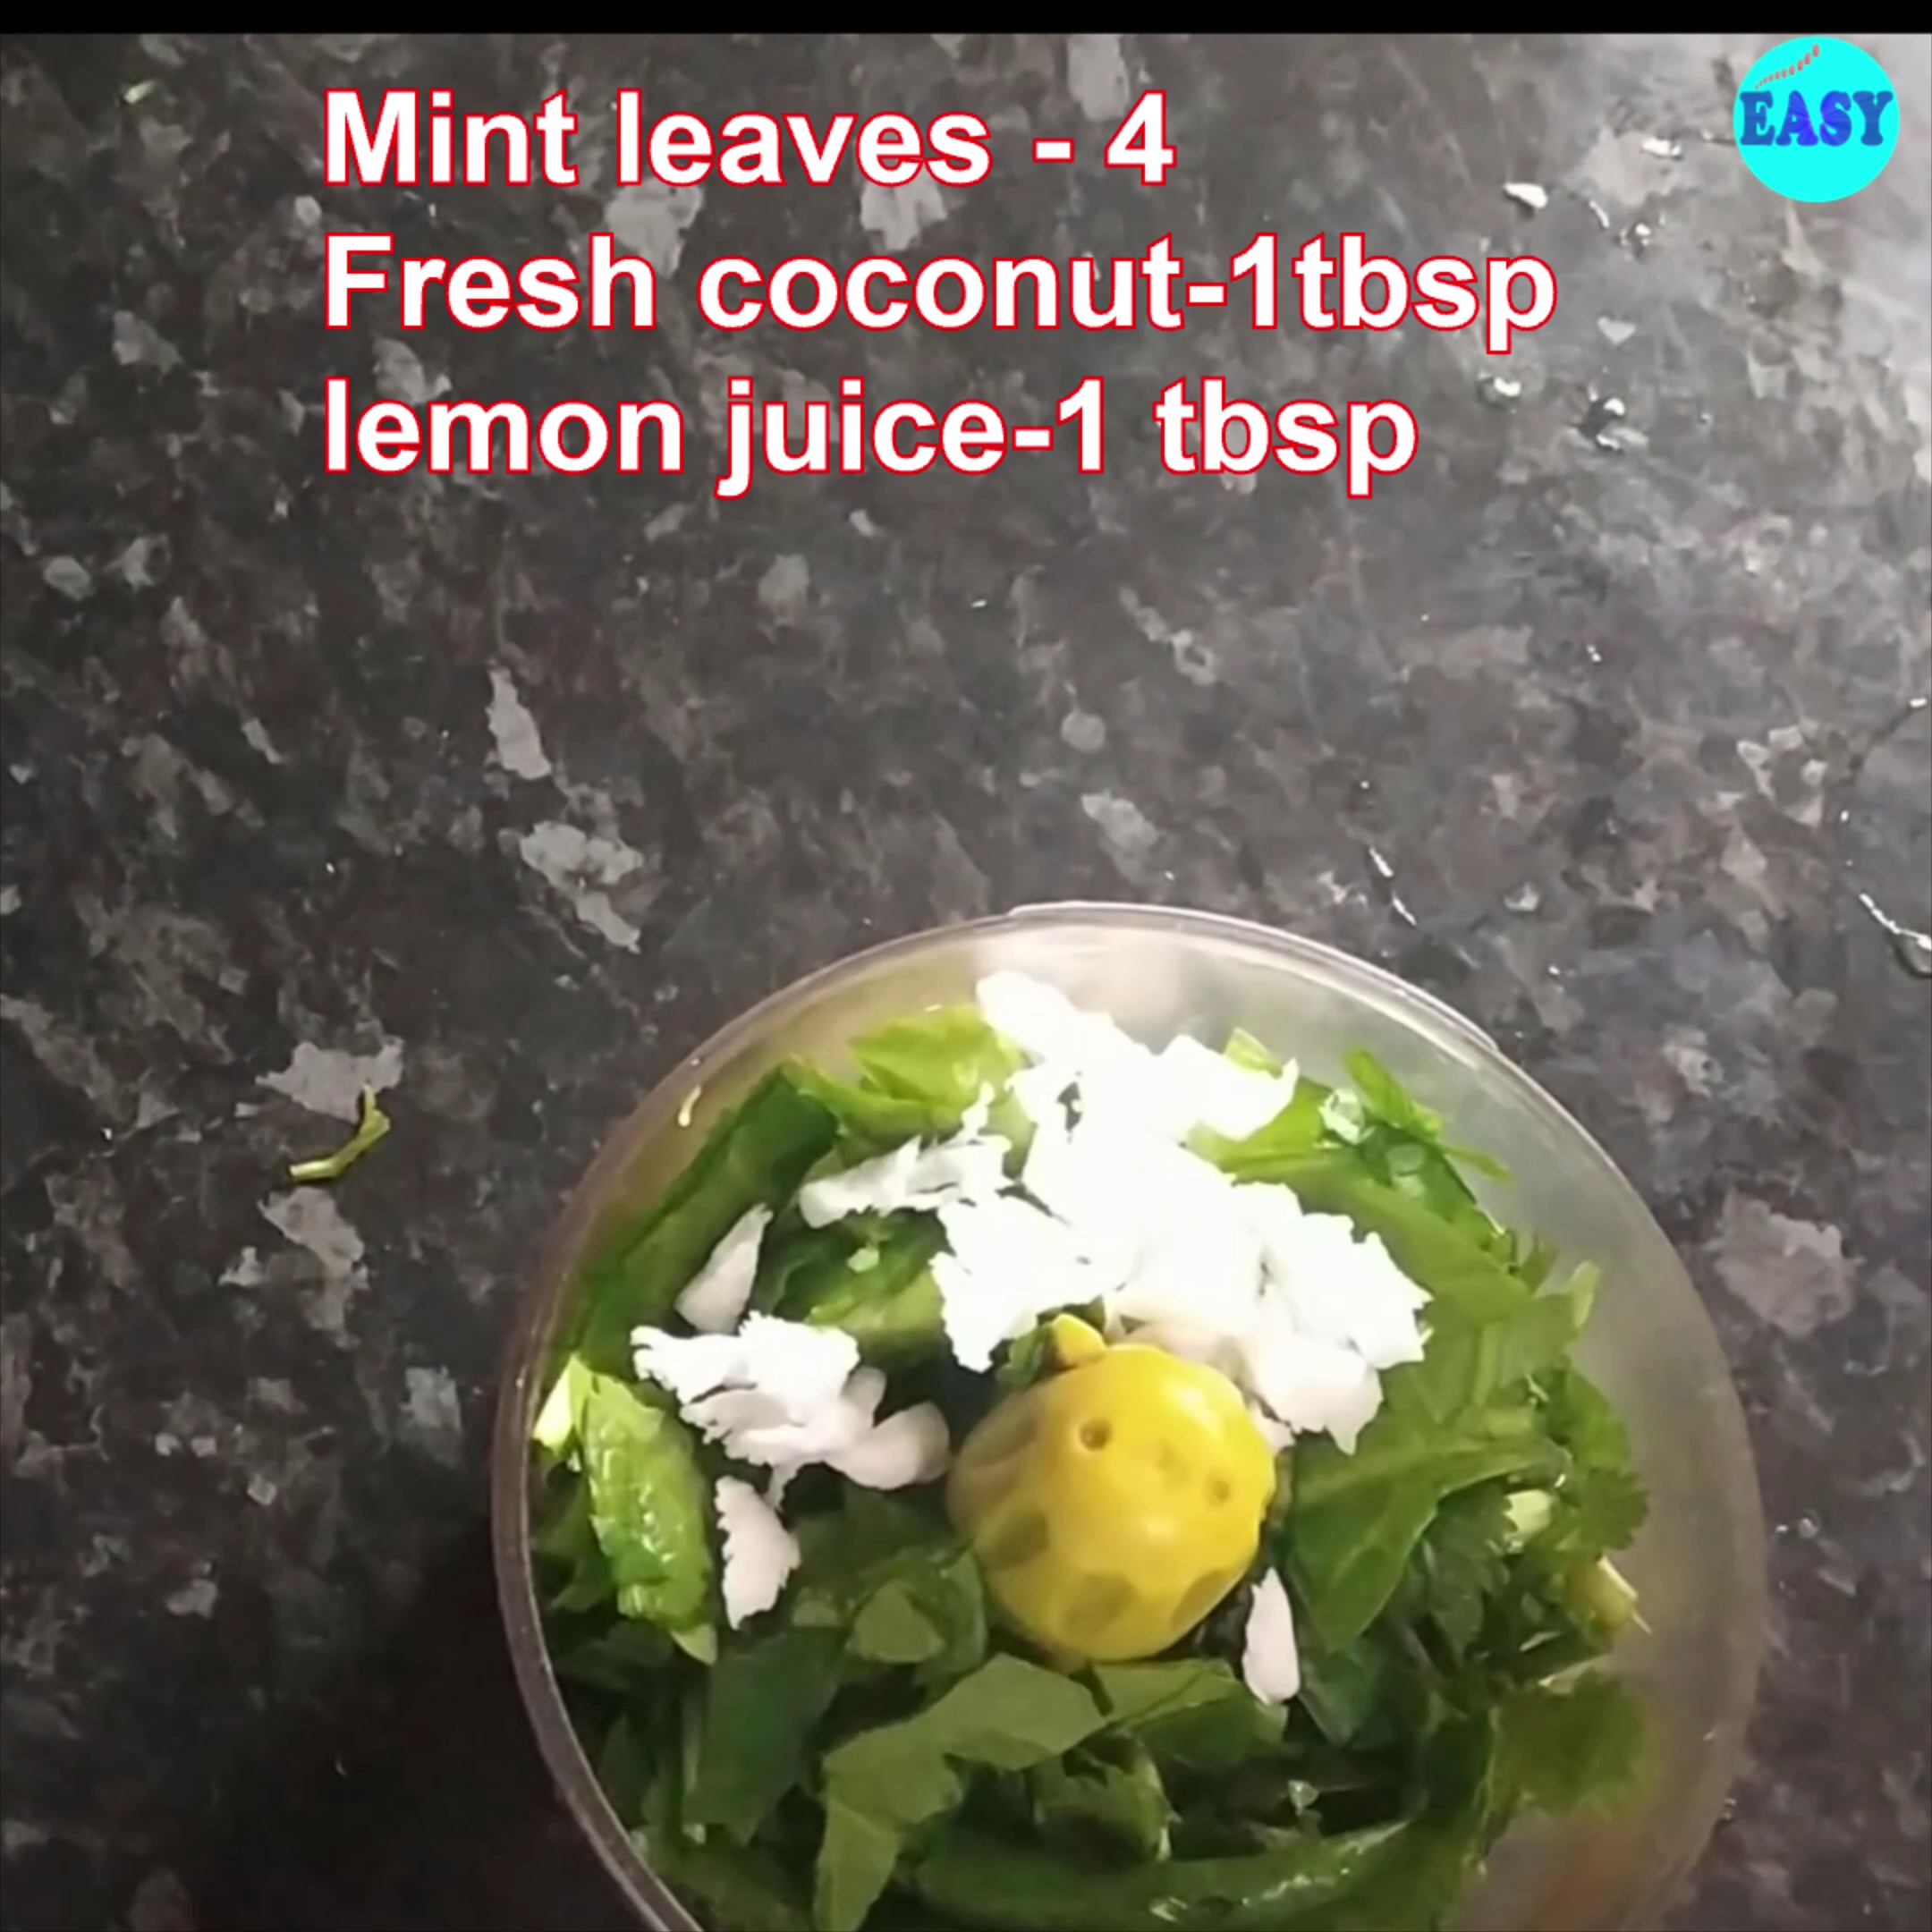 Step 3 - Add mint leaves, fresh coconut and lemon juice. Blend it with minimum water required to make a paste, keep aside to use later.